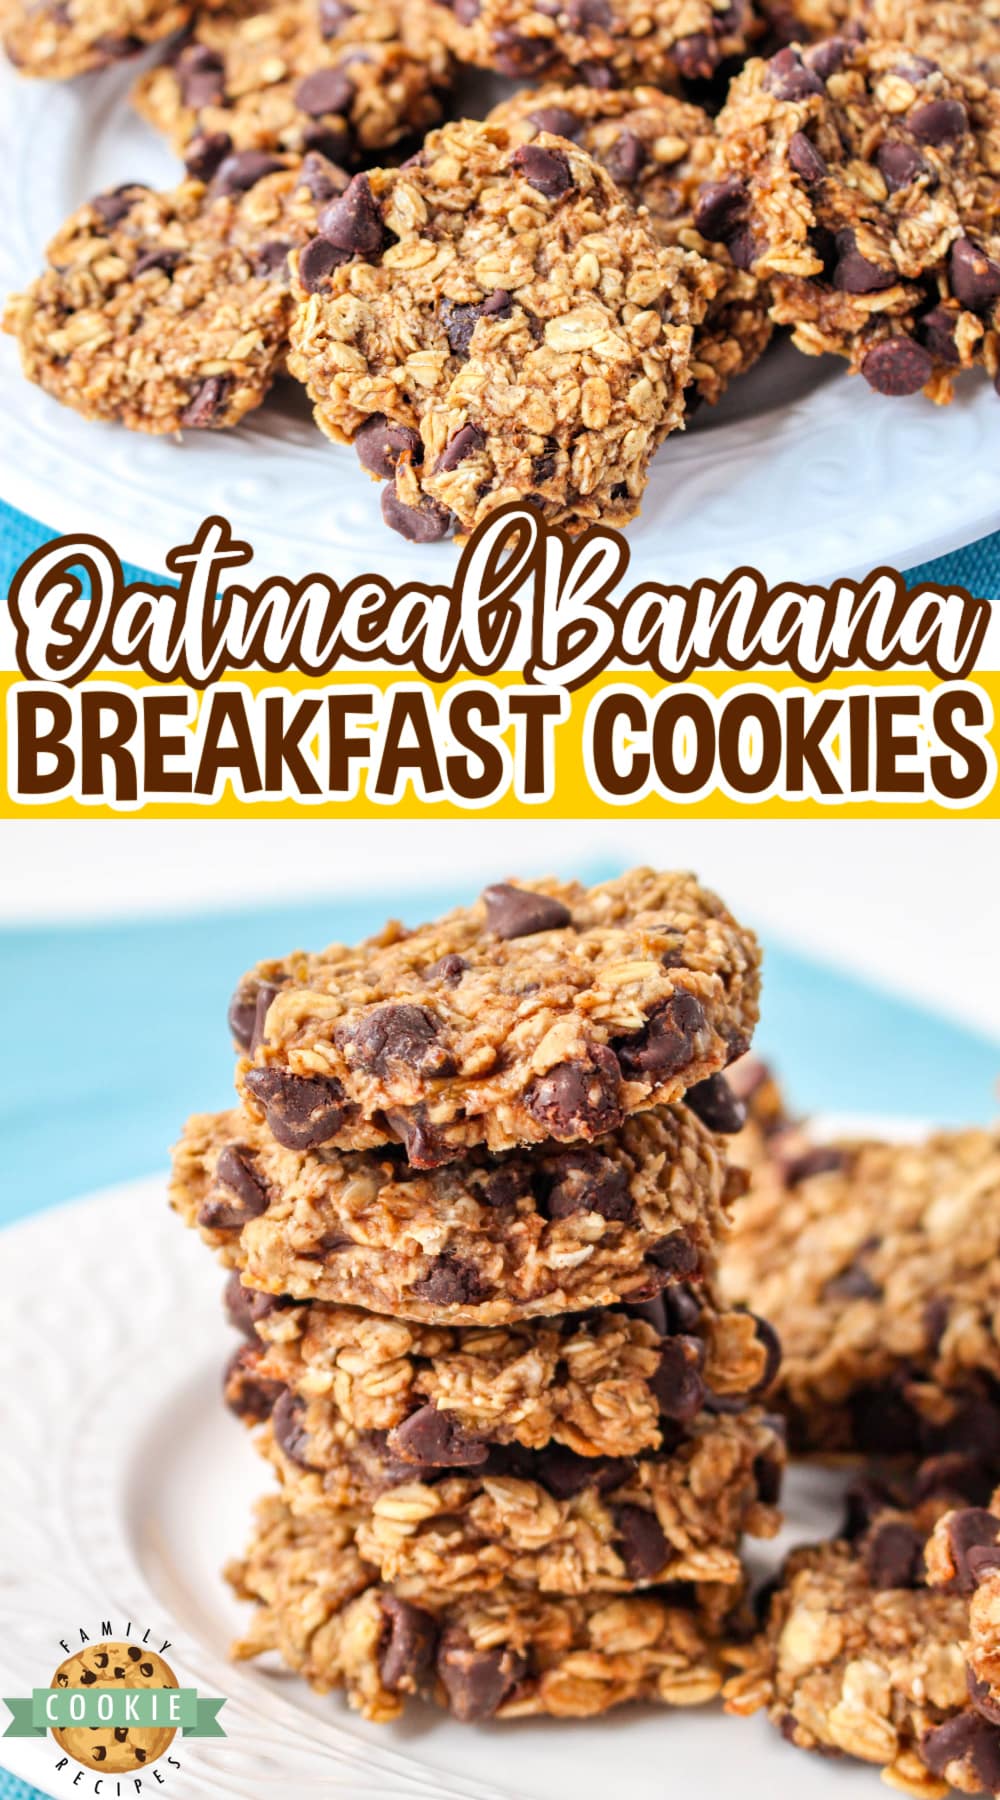 Oatmeal Banana Breakfast Cookies are healthy, delicious and made with only 6 ingredients. Breakfast cookie recipe made with ripe bananas, oats and yogurt. via @buttergirls